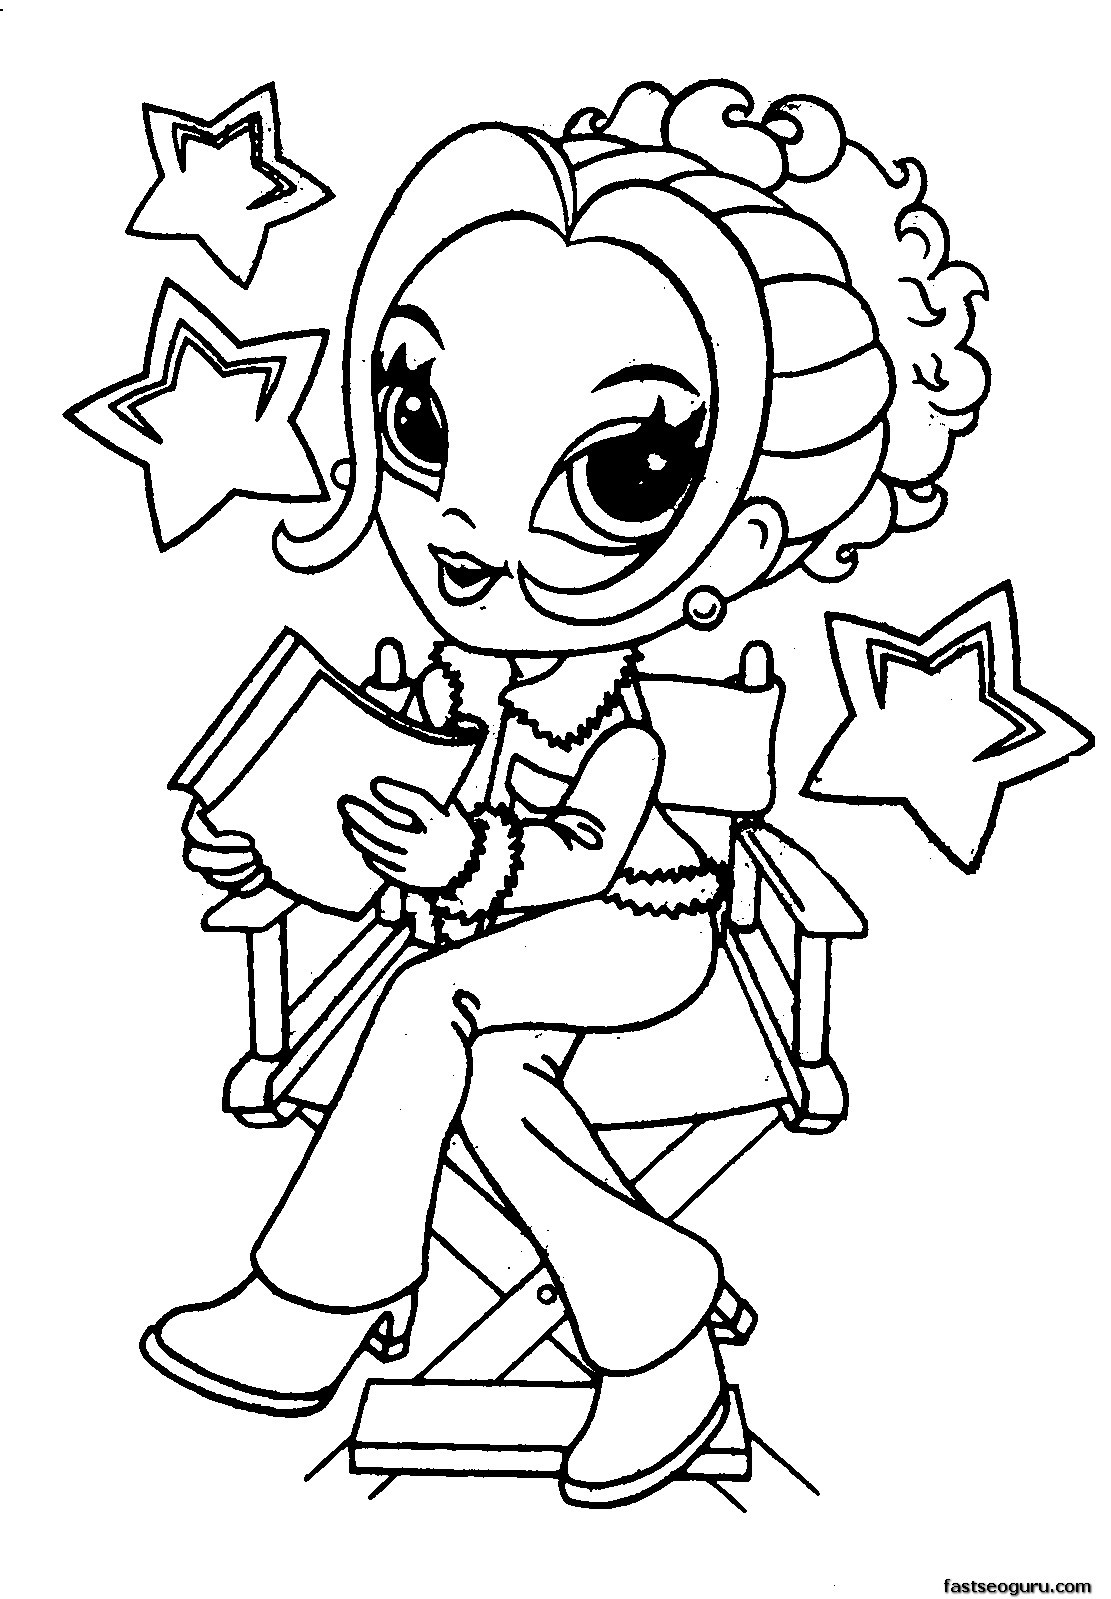 Printable Coloring Pages For Girls 10 And Up
 coloring pages for girls 10 and up